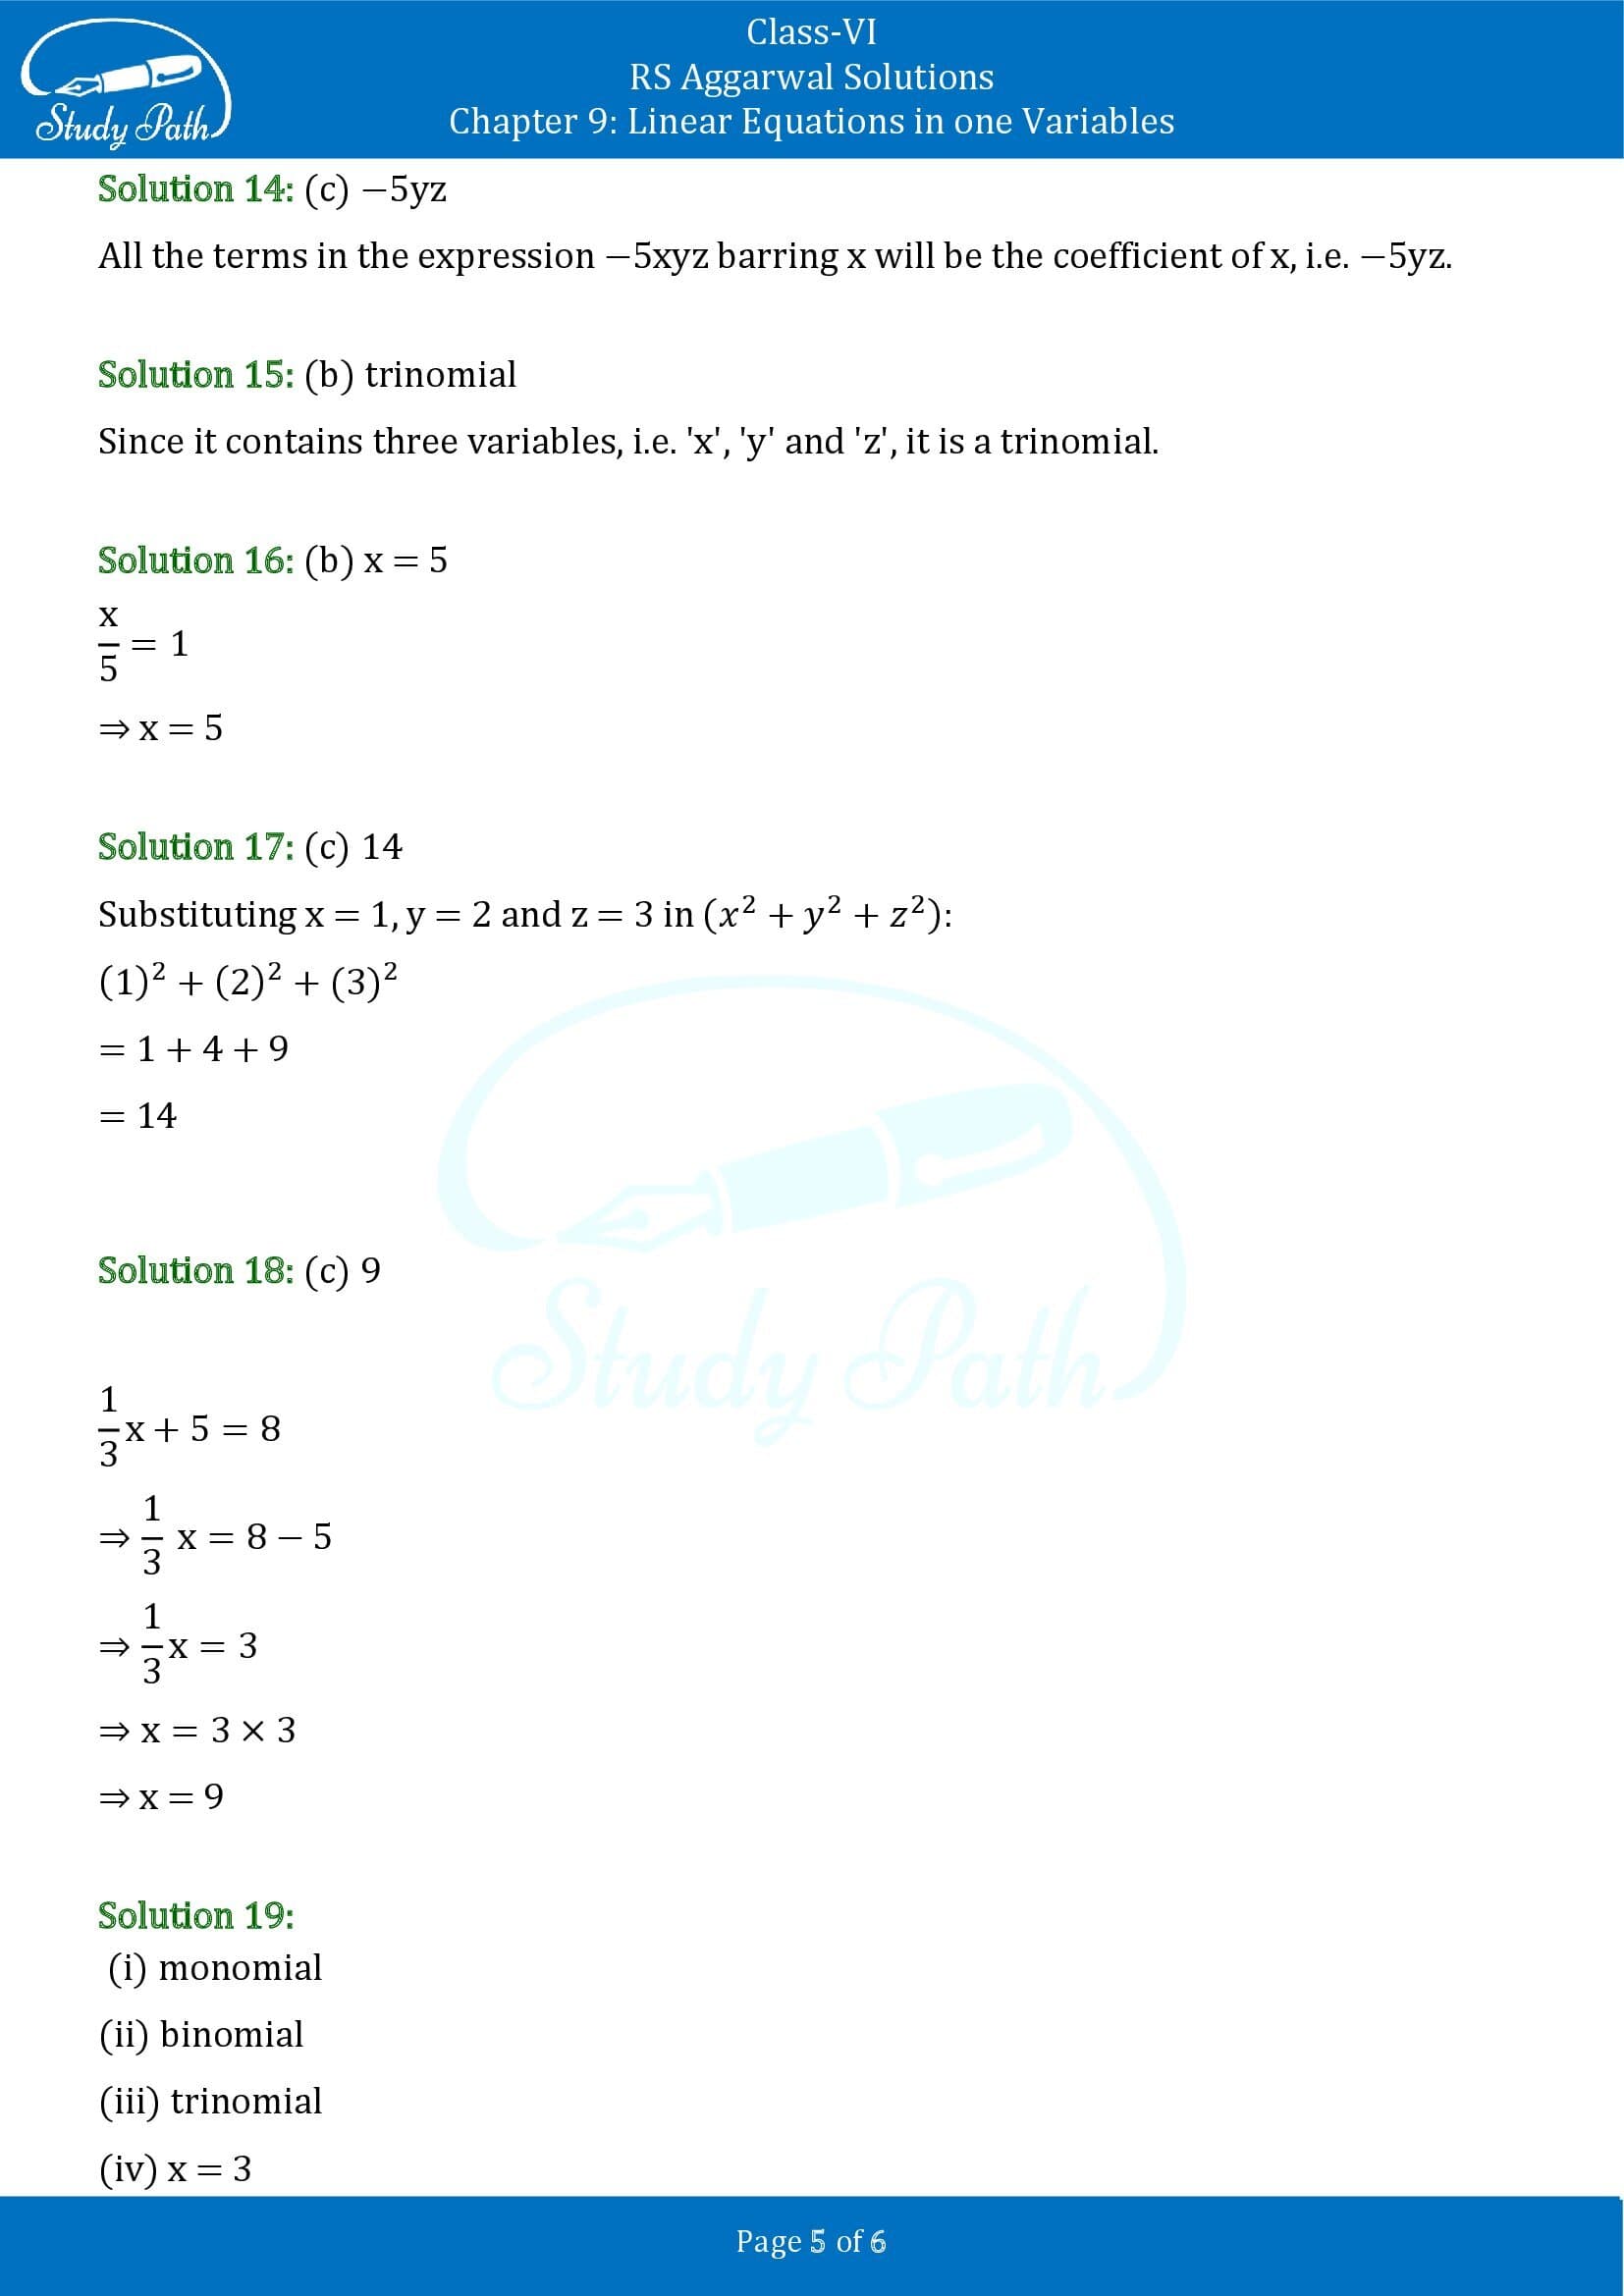 RS Aggarwal Solutions Class 6 Chapter 9 Linear Equations in One Variable Test Paper 00005